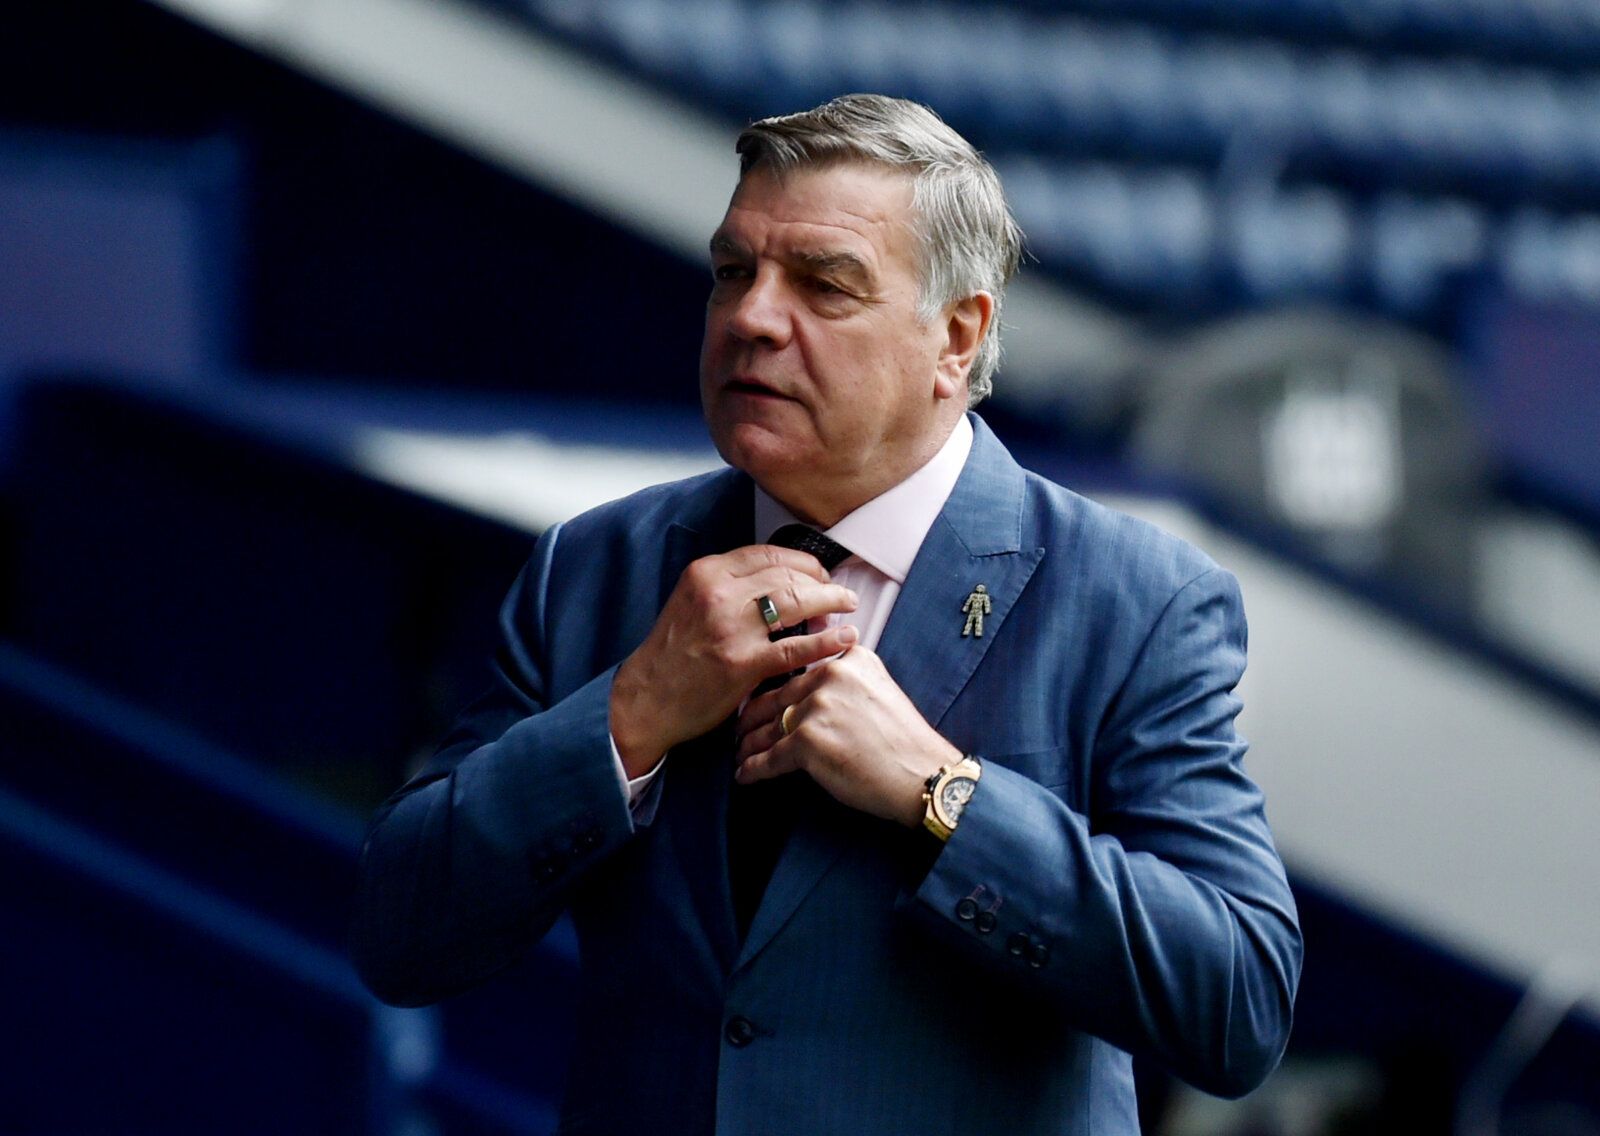 Soccer Football - Premier League - West Bromwich Albion v Liverpool - The Hawthorns, West Bromwich, Britain - May 16, 2021 West Bromwich Albion manager Sam Allardyce before the match Pool via REUTERS/Rui Vieira EDITORIAL USE ONLY. No use with unauthorized audio, video, data, fixture lists, club/league logos or 'live' services. Online in-match use limited to 75 images, no video emulation. No use in betting, games or single club /league/player publications.  Please contact your account representat